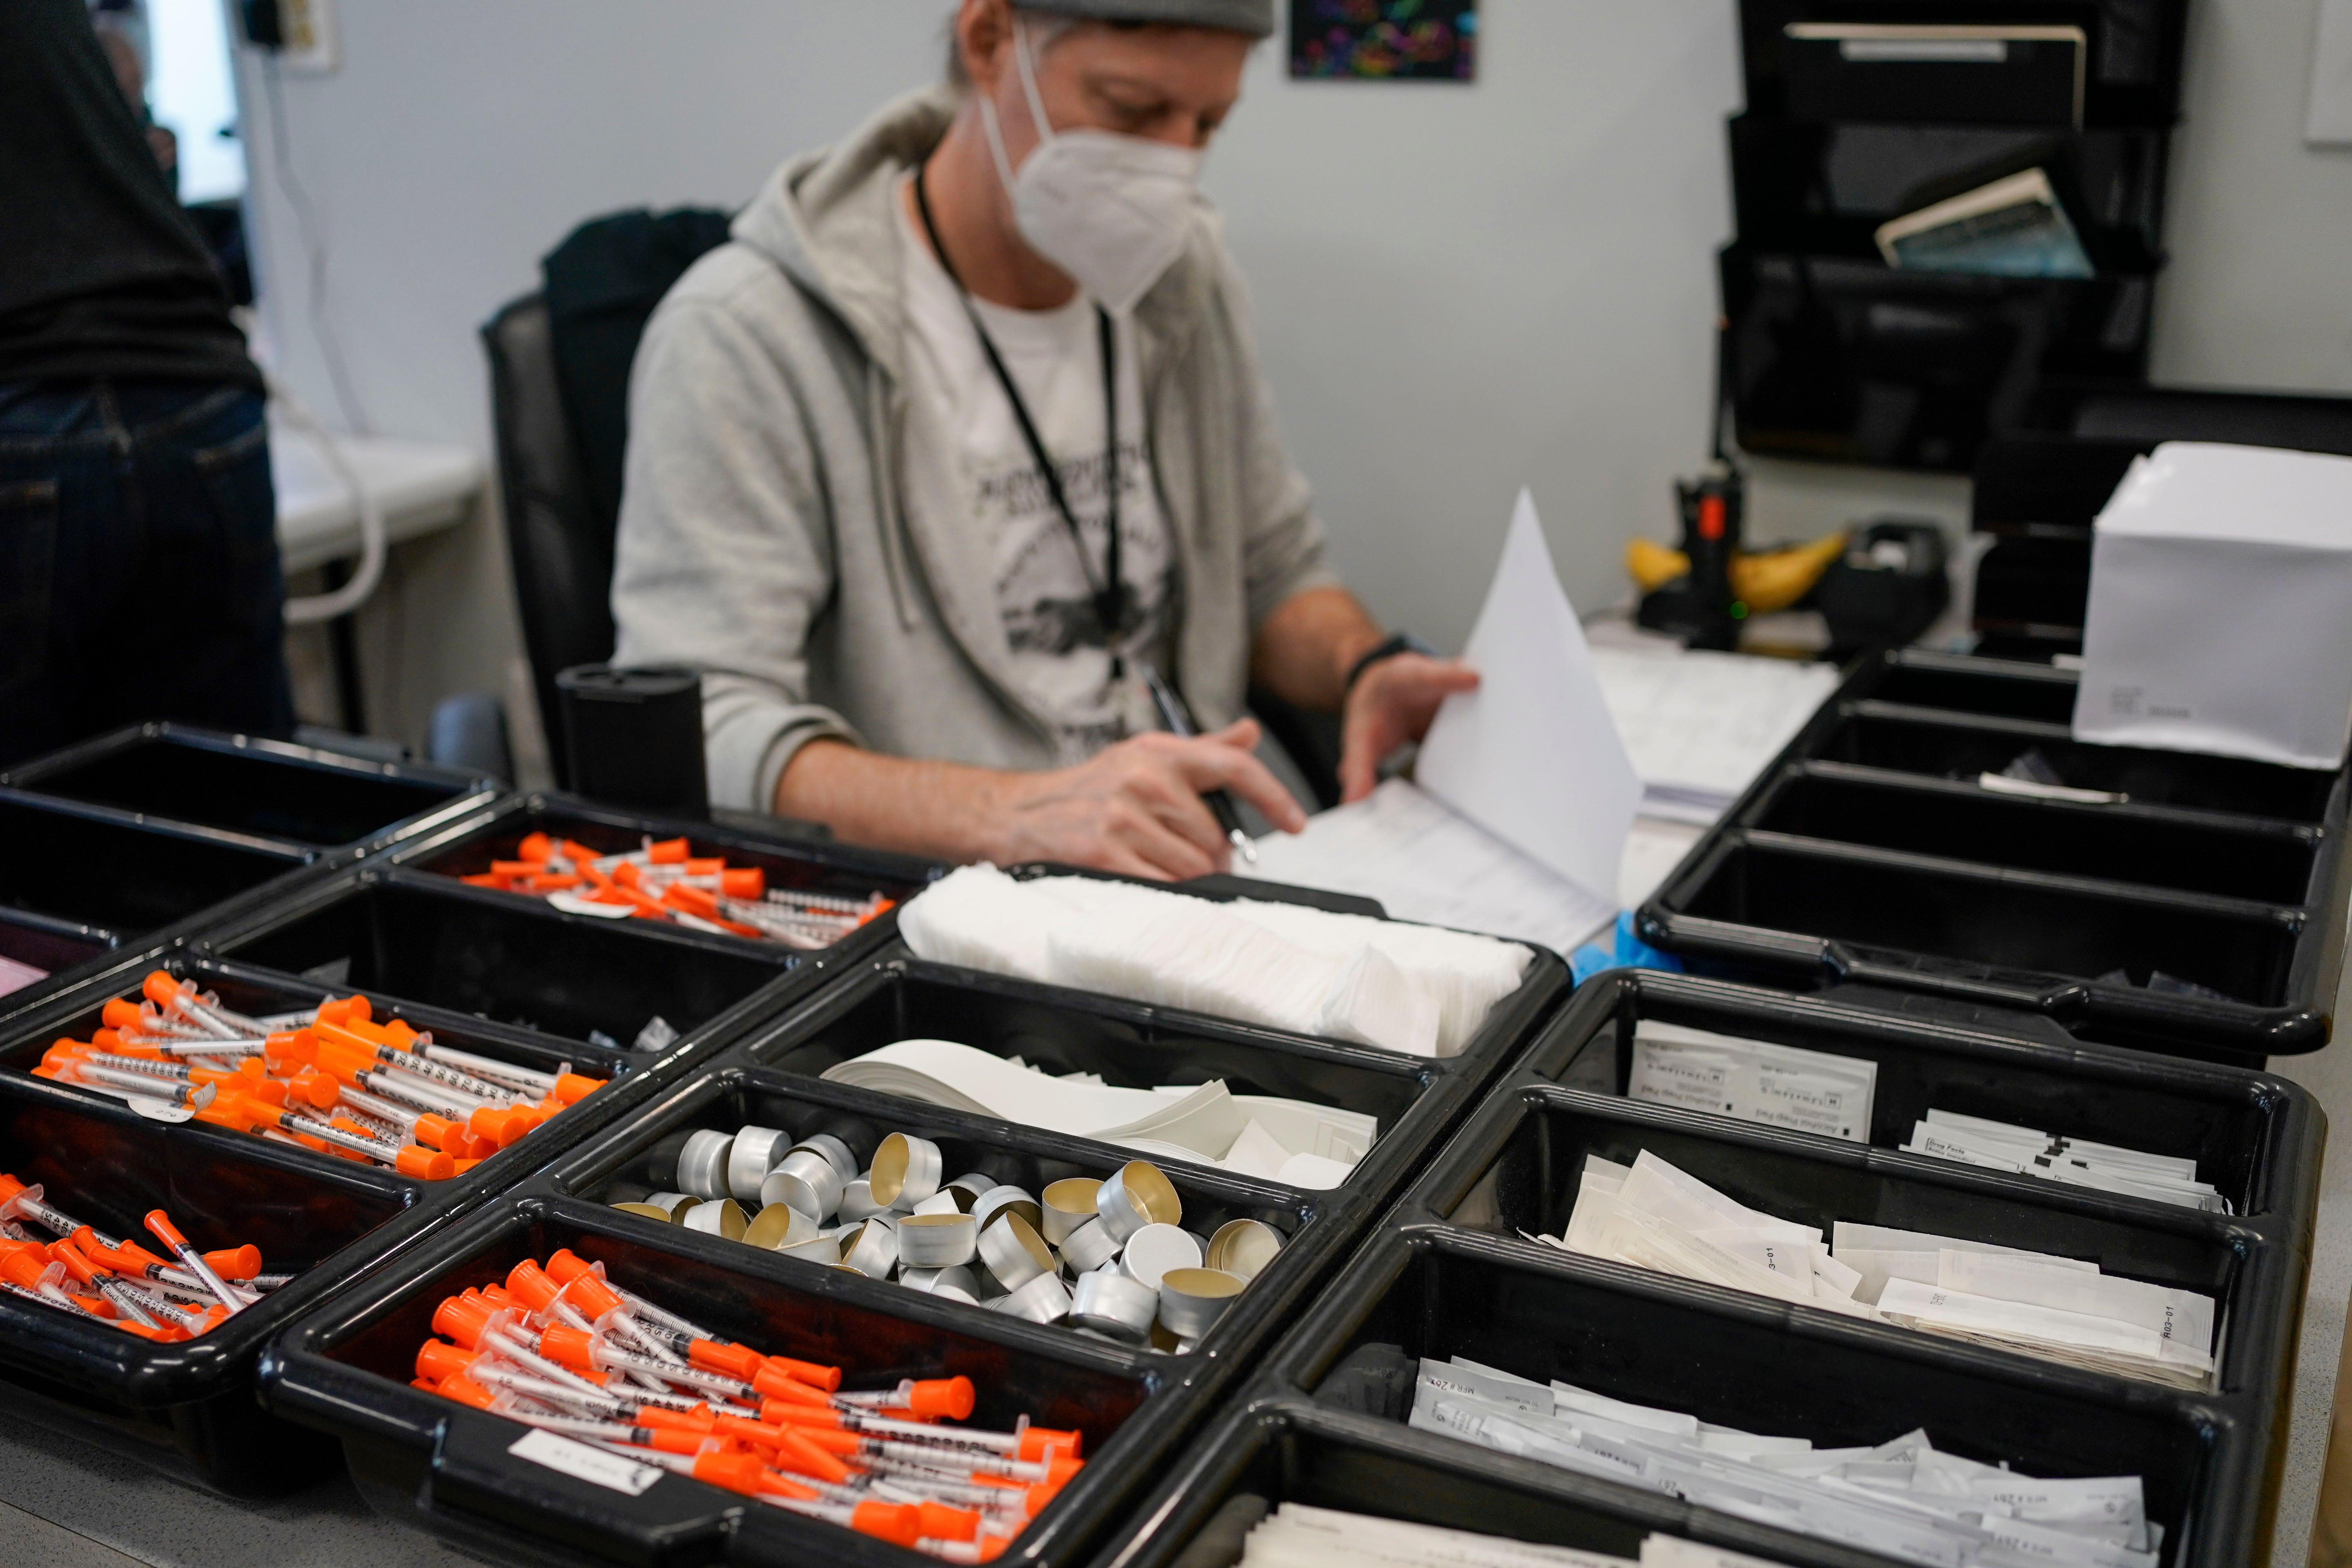 Supplies are seen inside an overdose prevention centre in New York in February 2022.